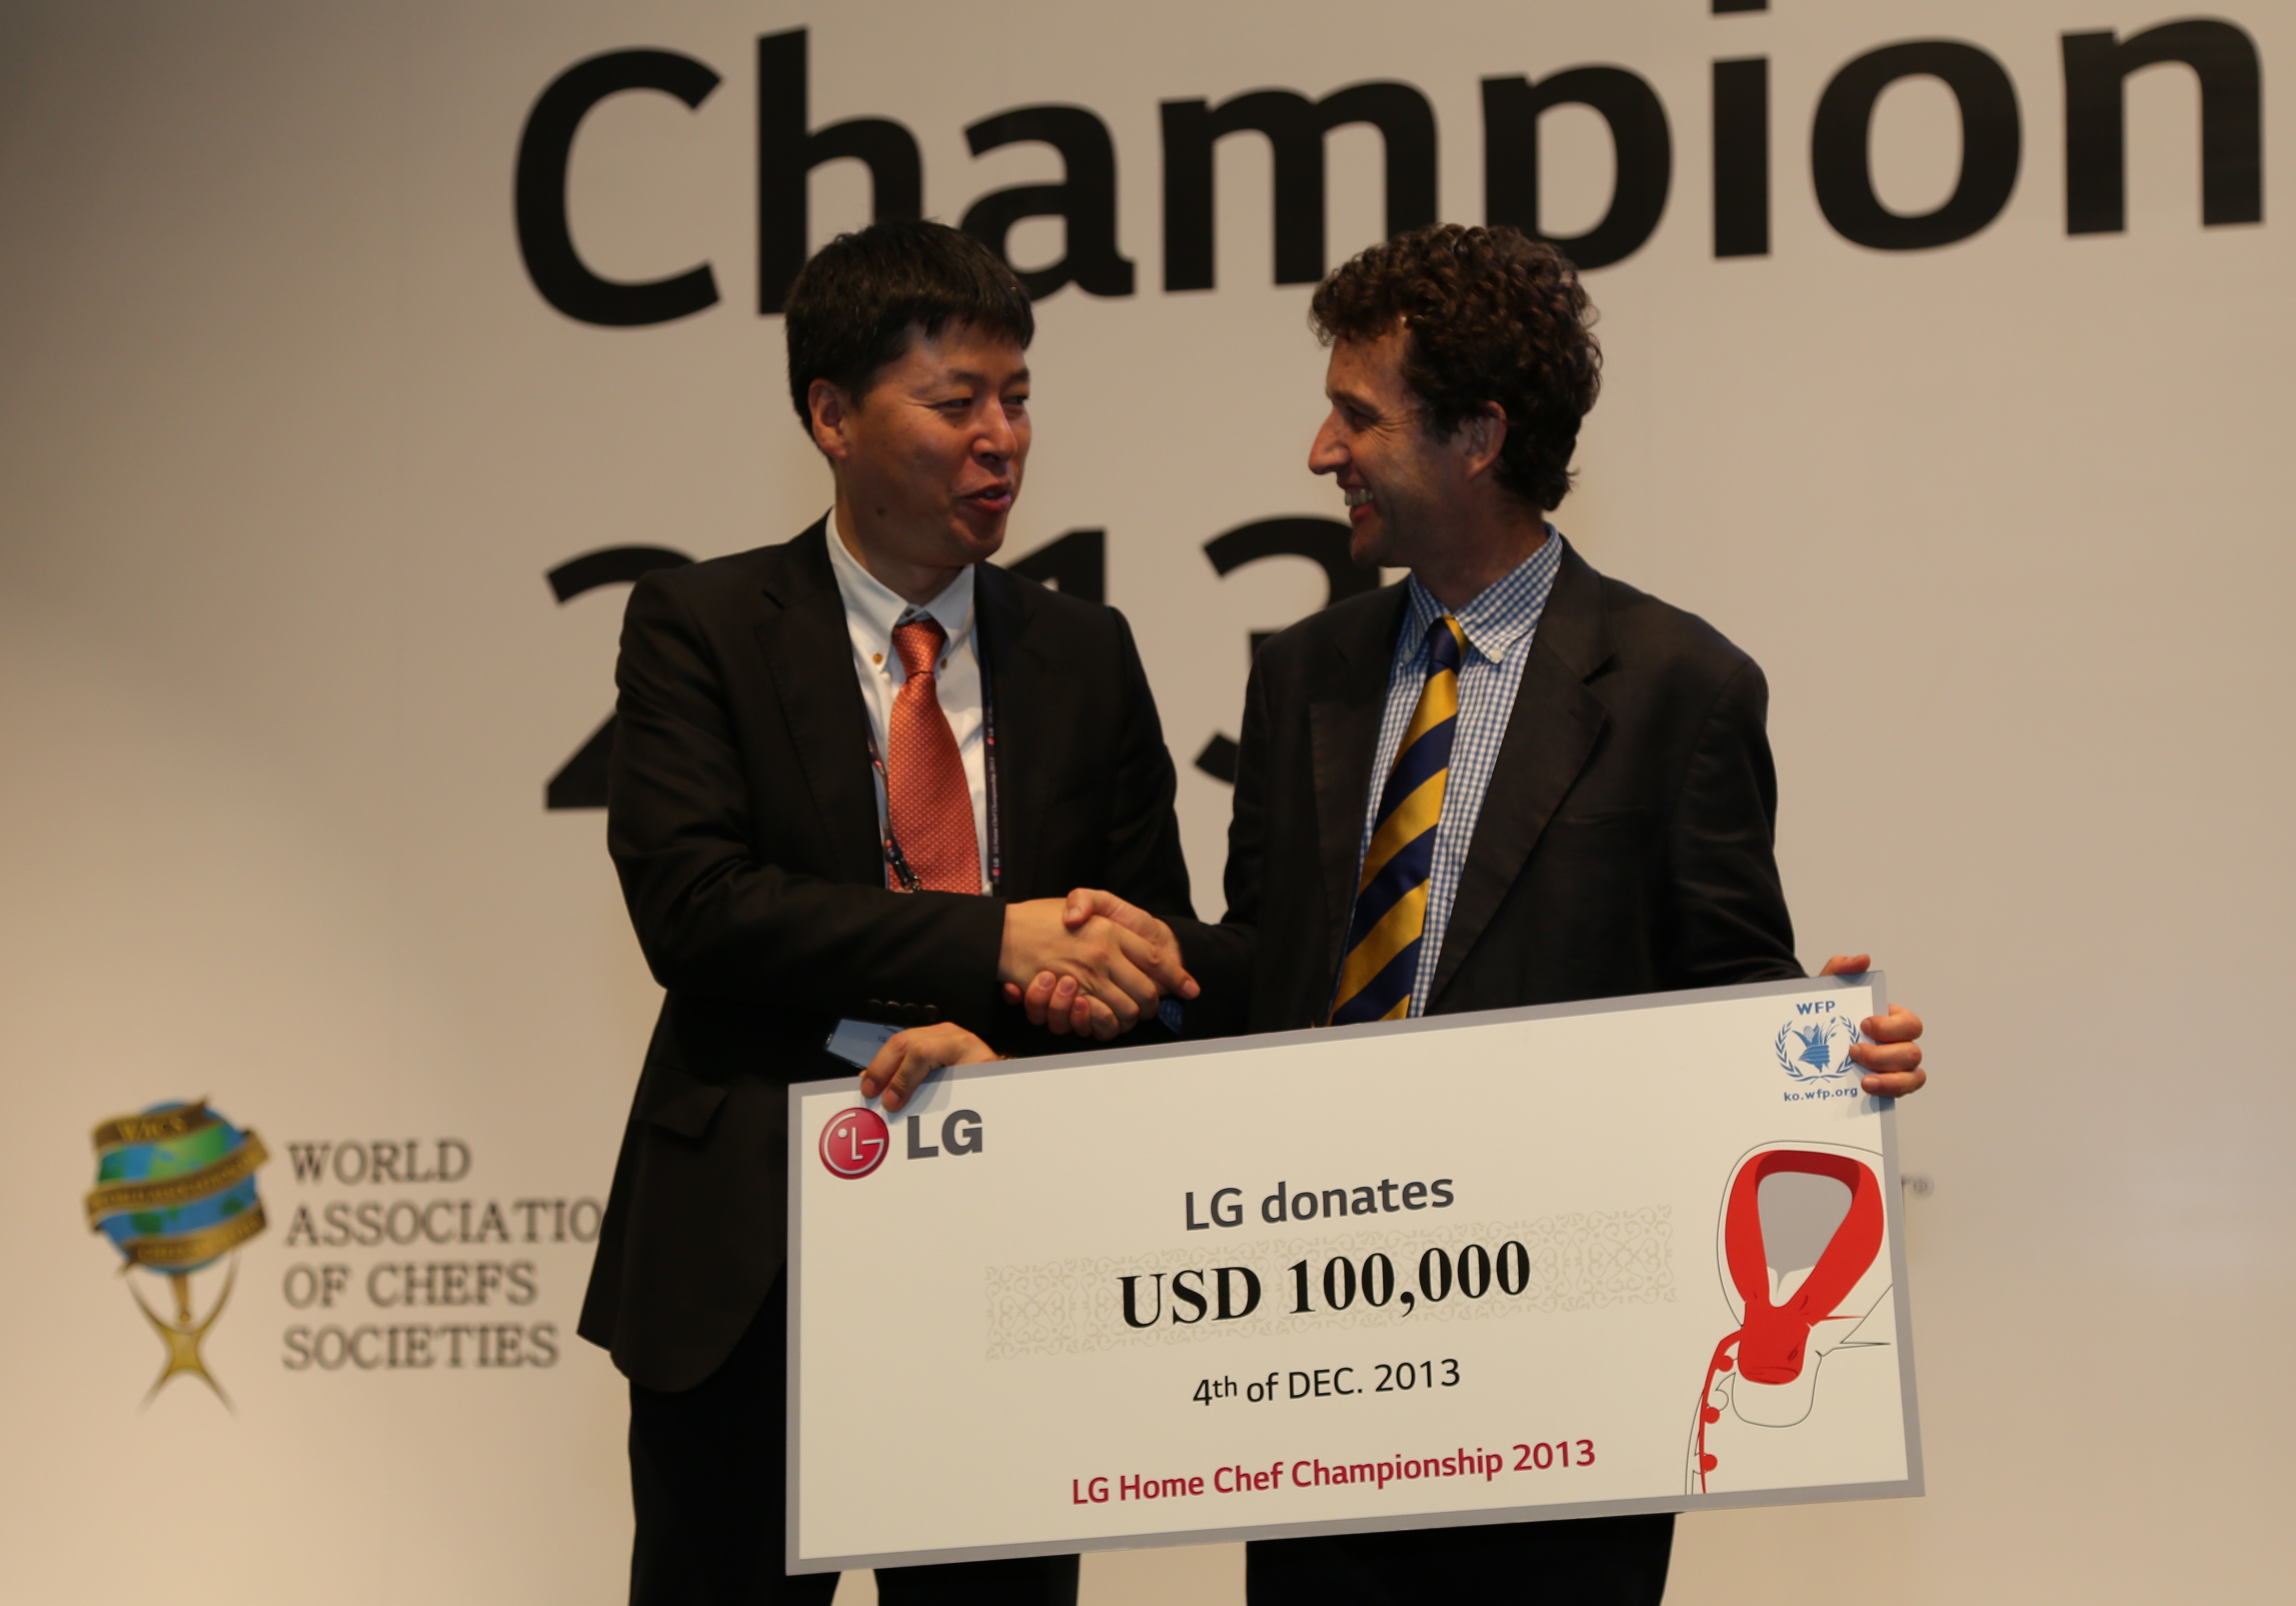 An LG representative shakes hands with a gentleman from the United Nations World Food Programme (WFP) while holding a panel showing LG’s donation of 100,00 USD at the LG Home Chef Championship 2013